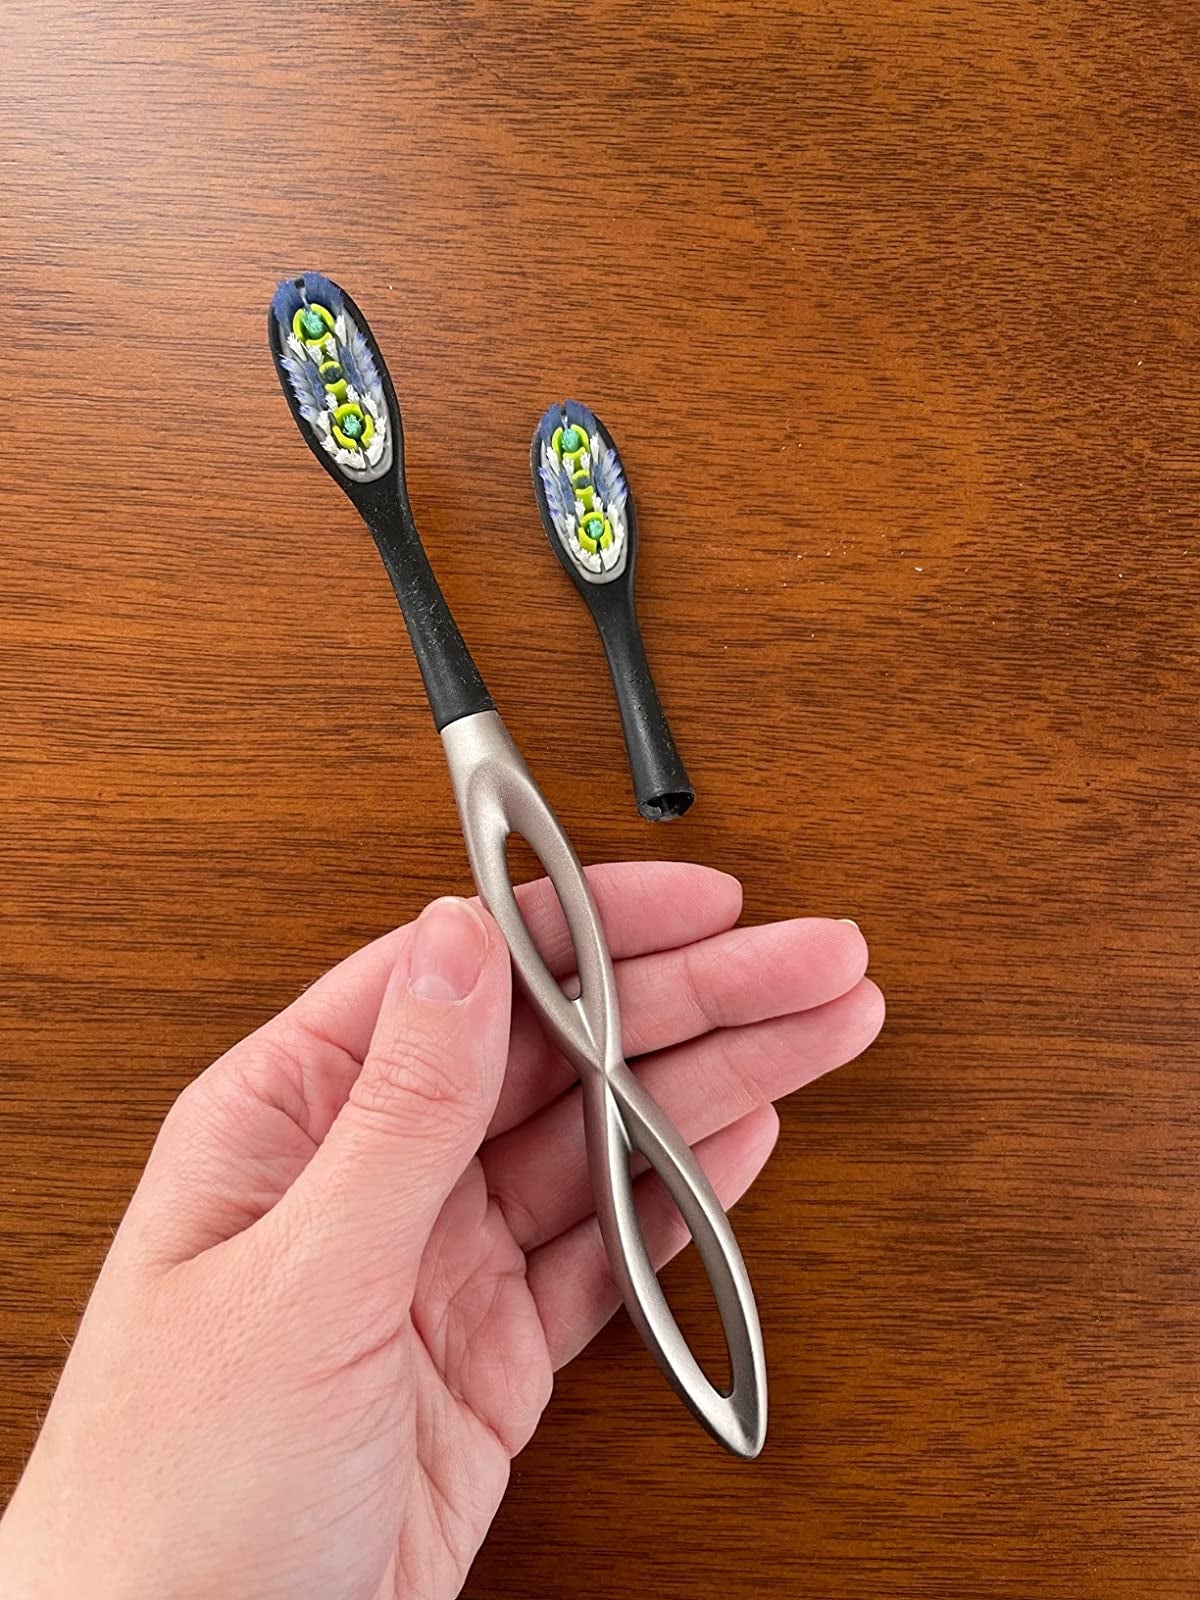 reviewer holding the silver and black toothbrush with curved handle that kind of looks like a squashed infinity symbol, next to the extra head